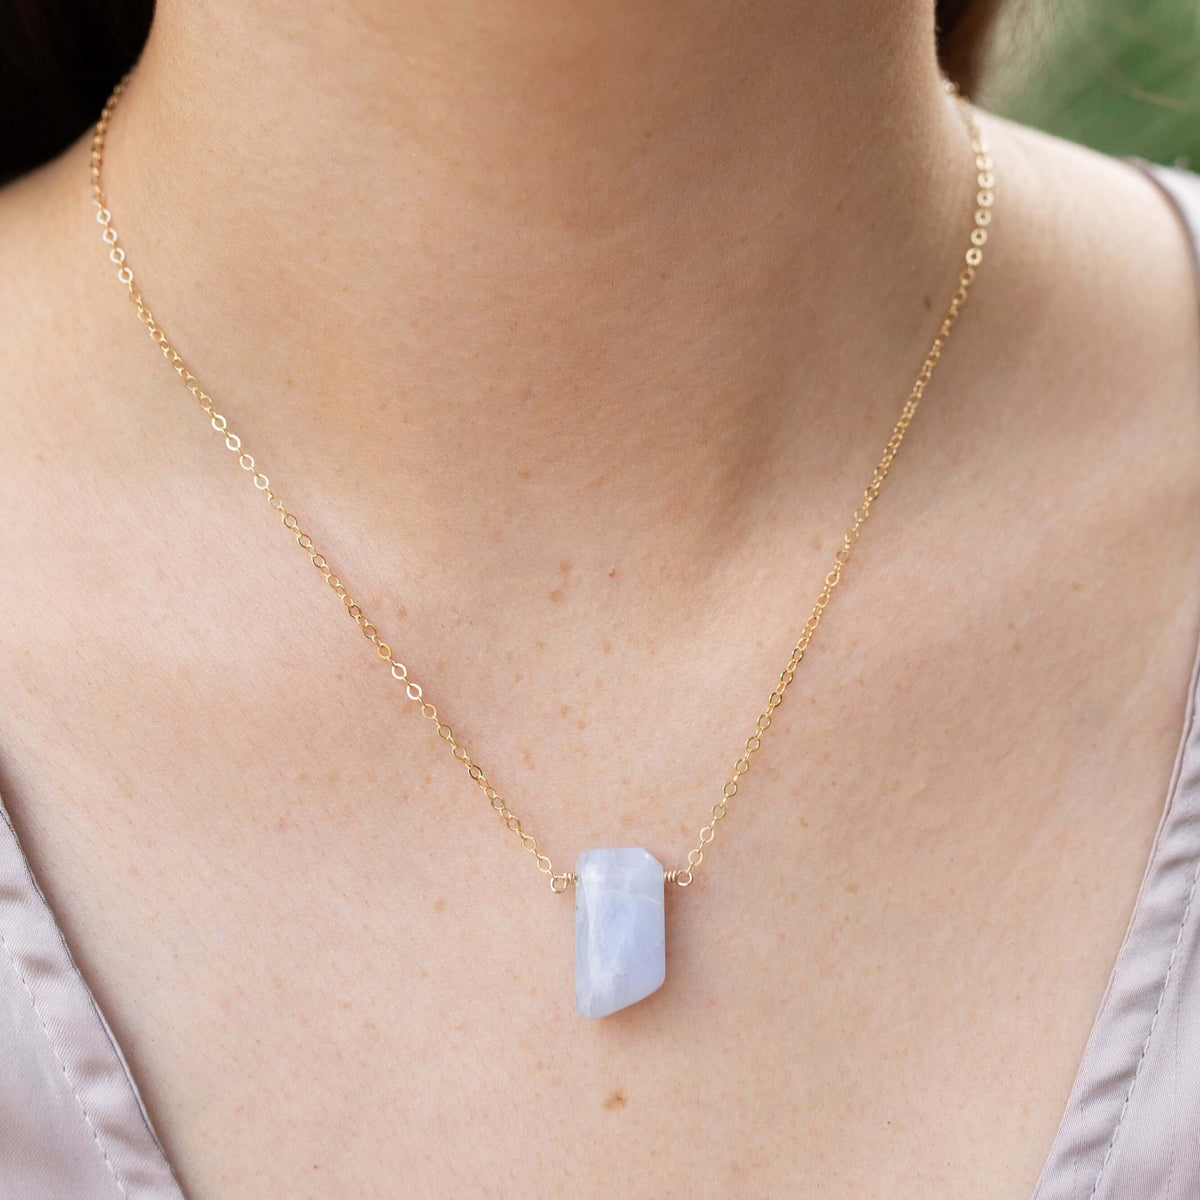 Small Smooth Slab Point Necklace - Blue Lace Agate - 14K Gold Fill - Luna Tide Handmade Jewellery